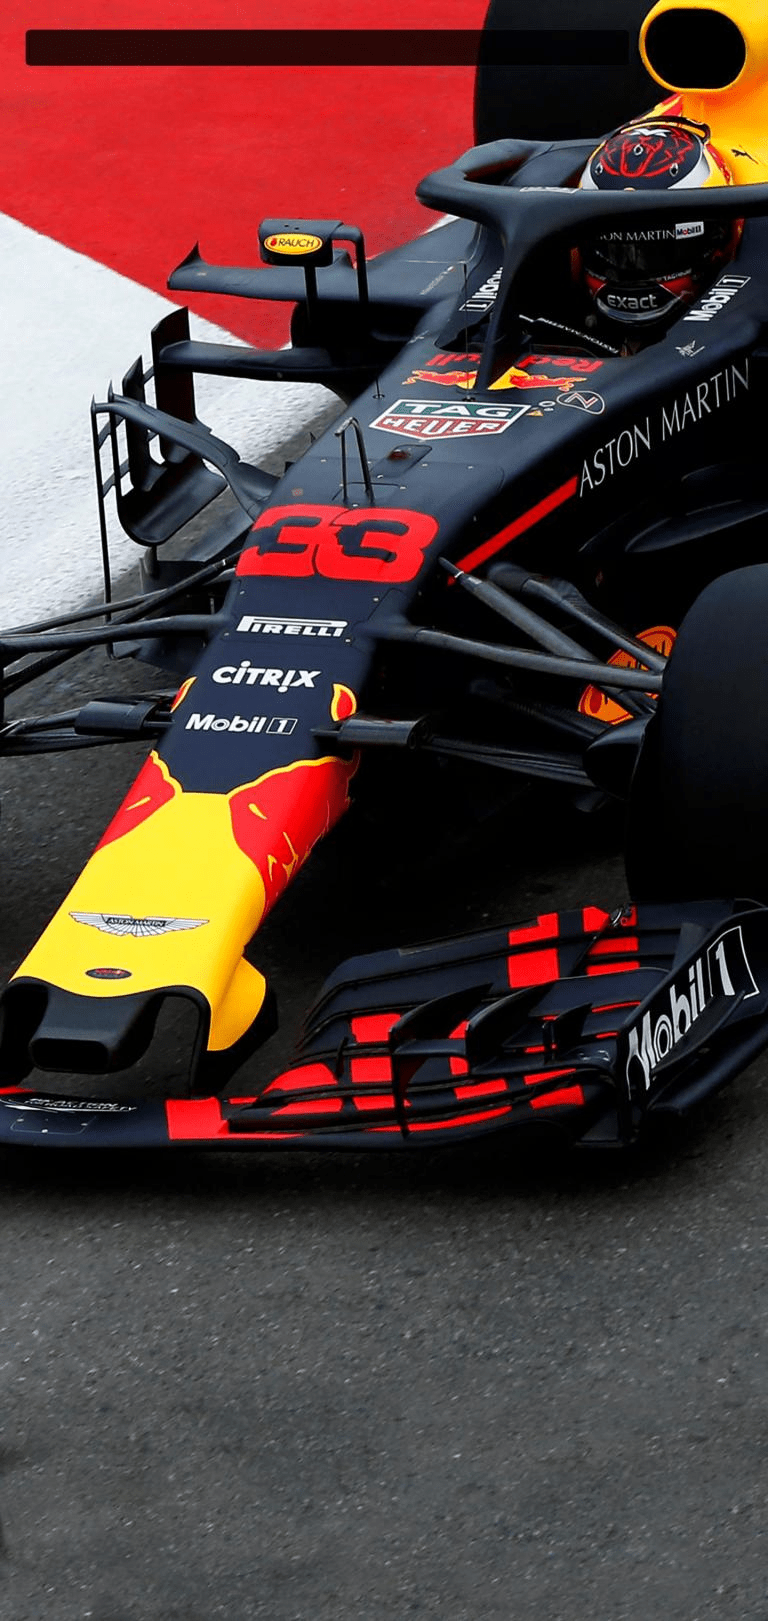 Red Bull Racing F1 Wallpapers Top Free Red Bull Racing F1 Backgrounds Wallpaperaccess